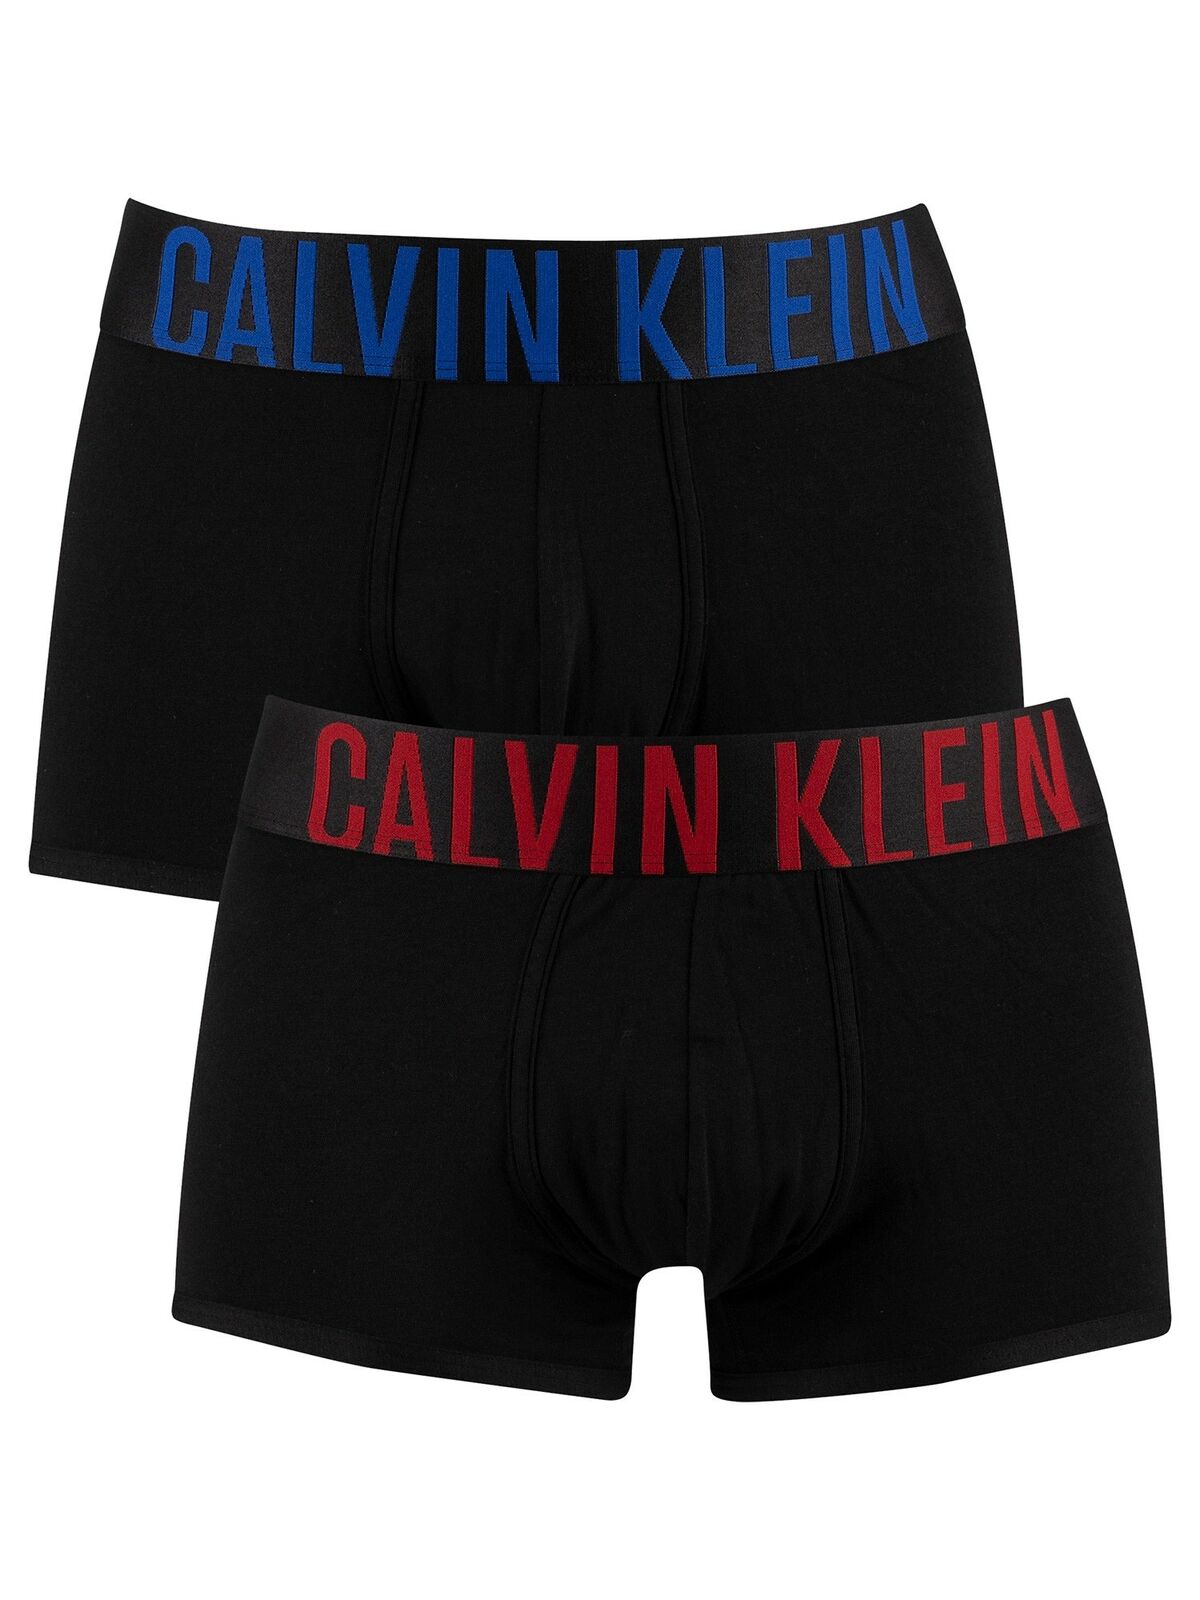 Calvin Klein Mens 2 Pack Max 90% OFF Power Black 2021new shipping free shipping Intense Trunks